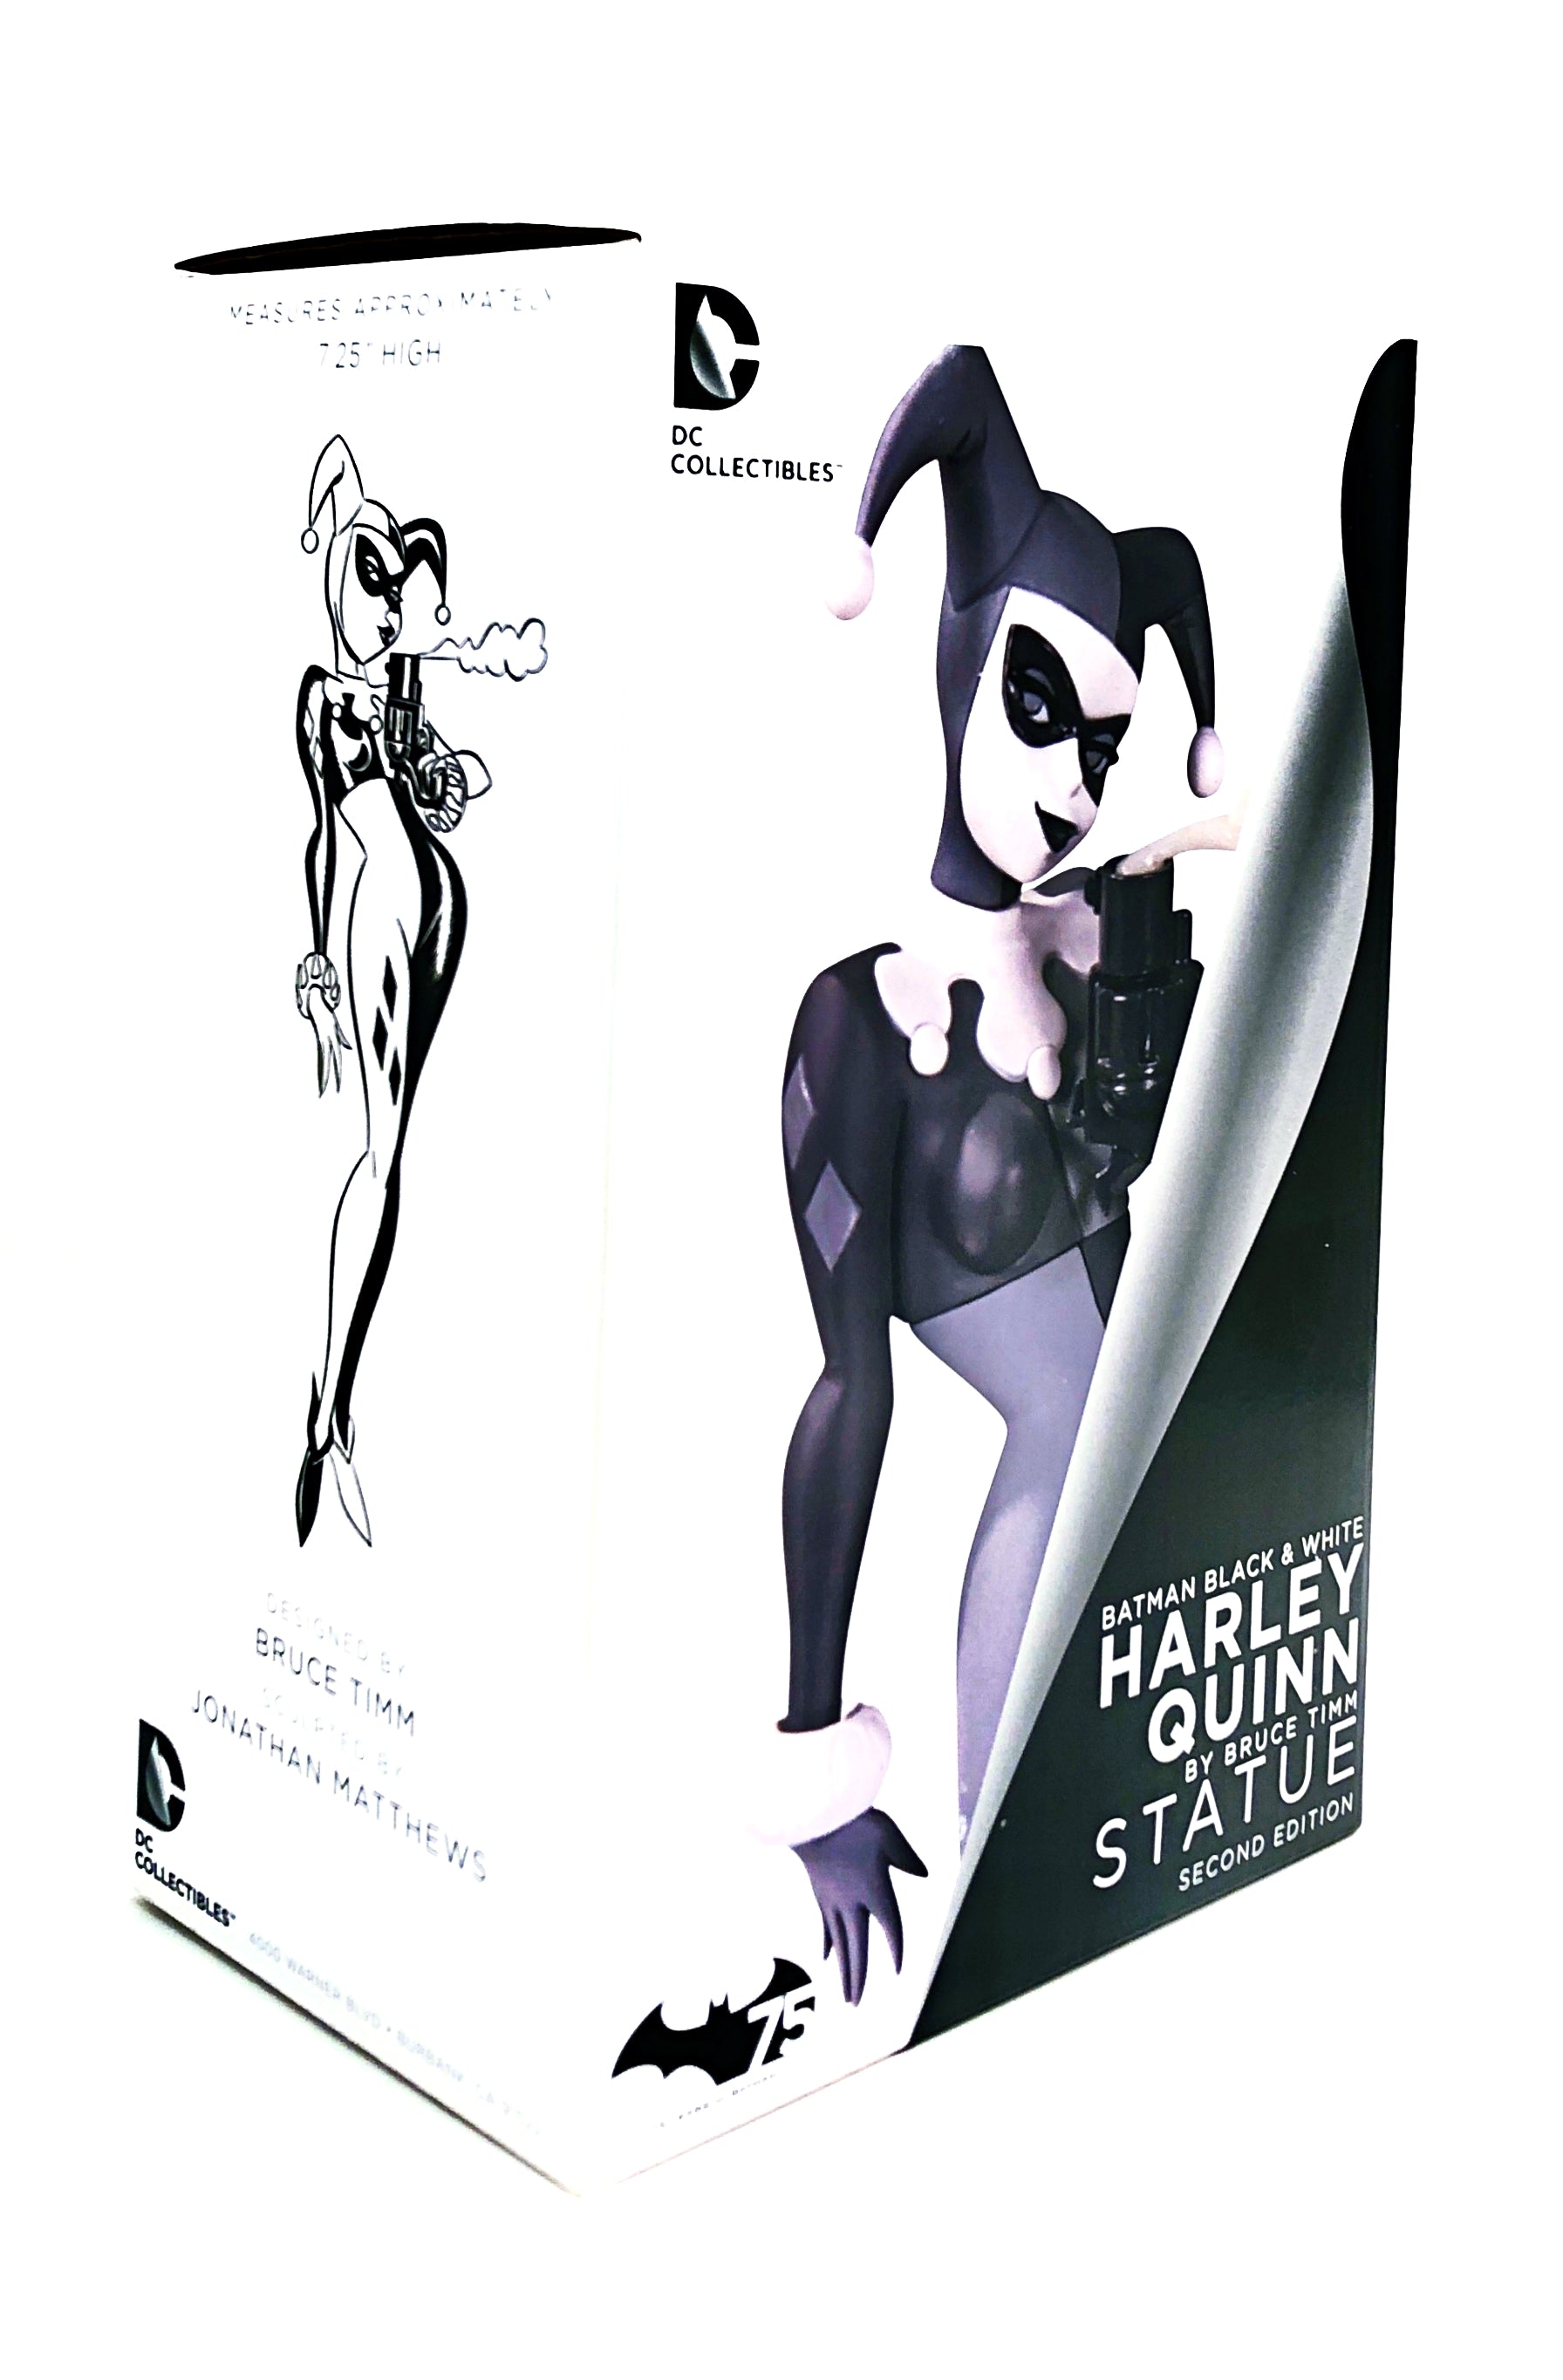 Black & White Harley Quinn Statue (2nd Ed.) | DC Collectibles